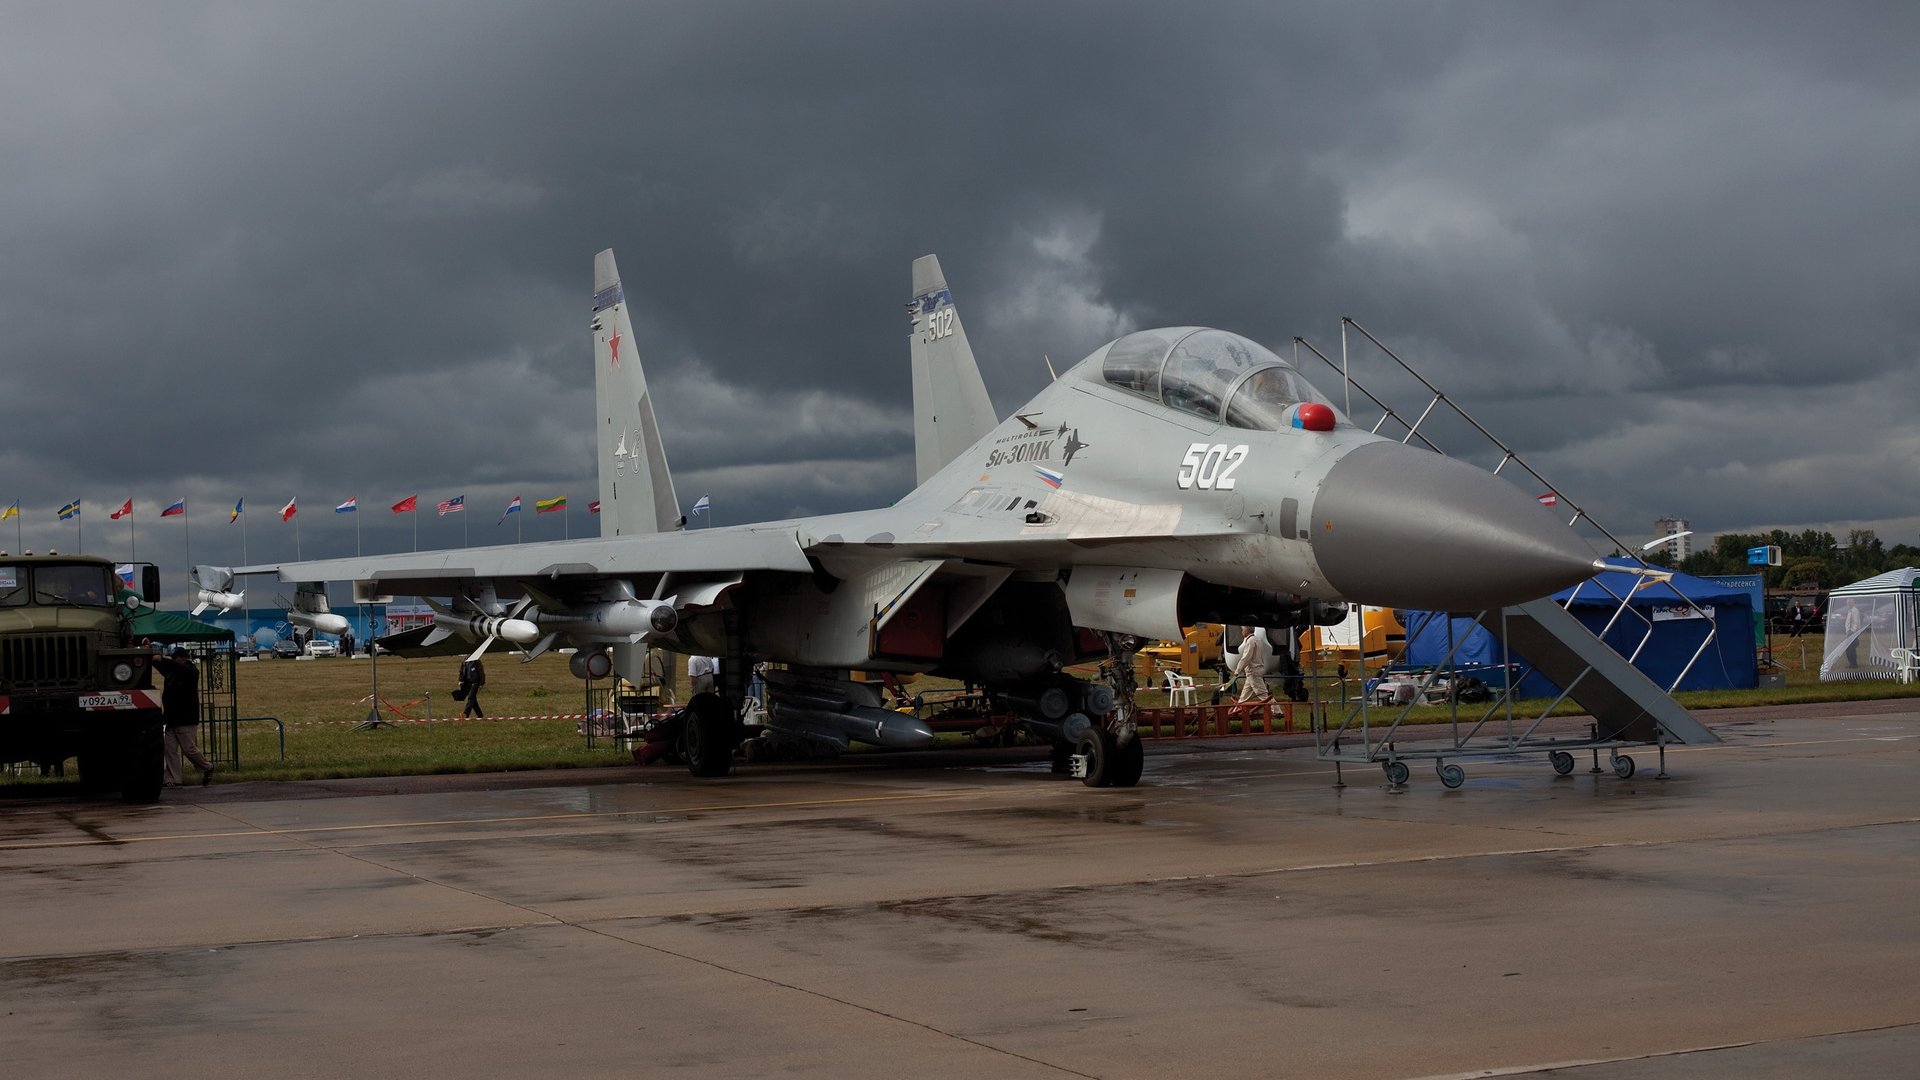 Best Sukhoi Su-30 wallpaper ID:380857 for High Resolution hd 1920x1080 computer